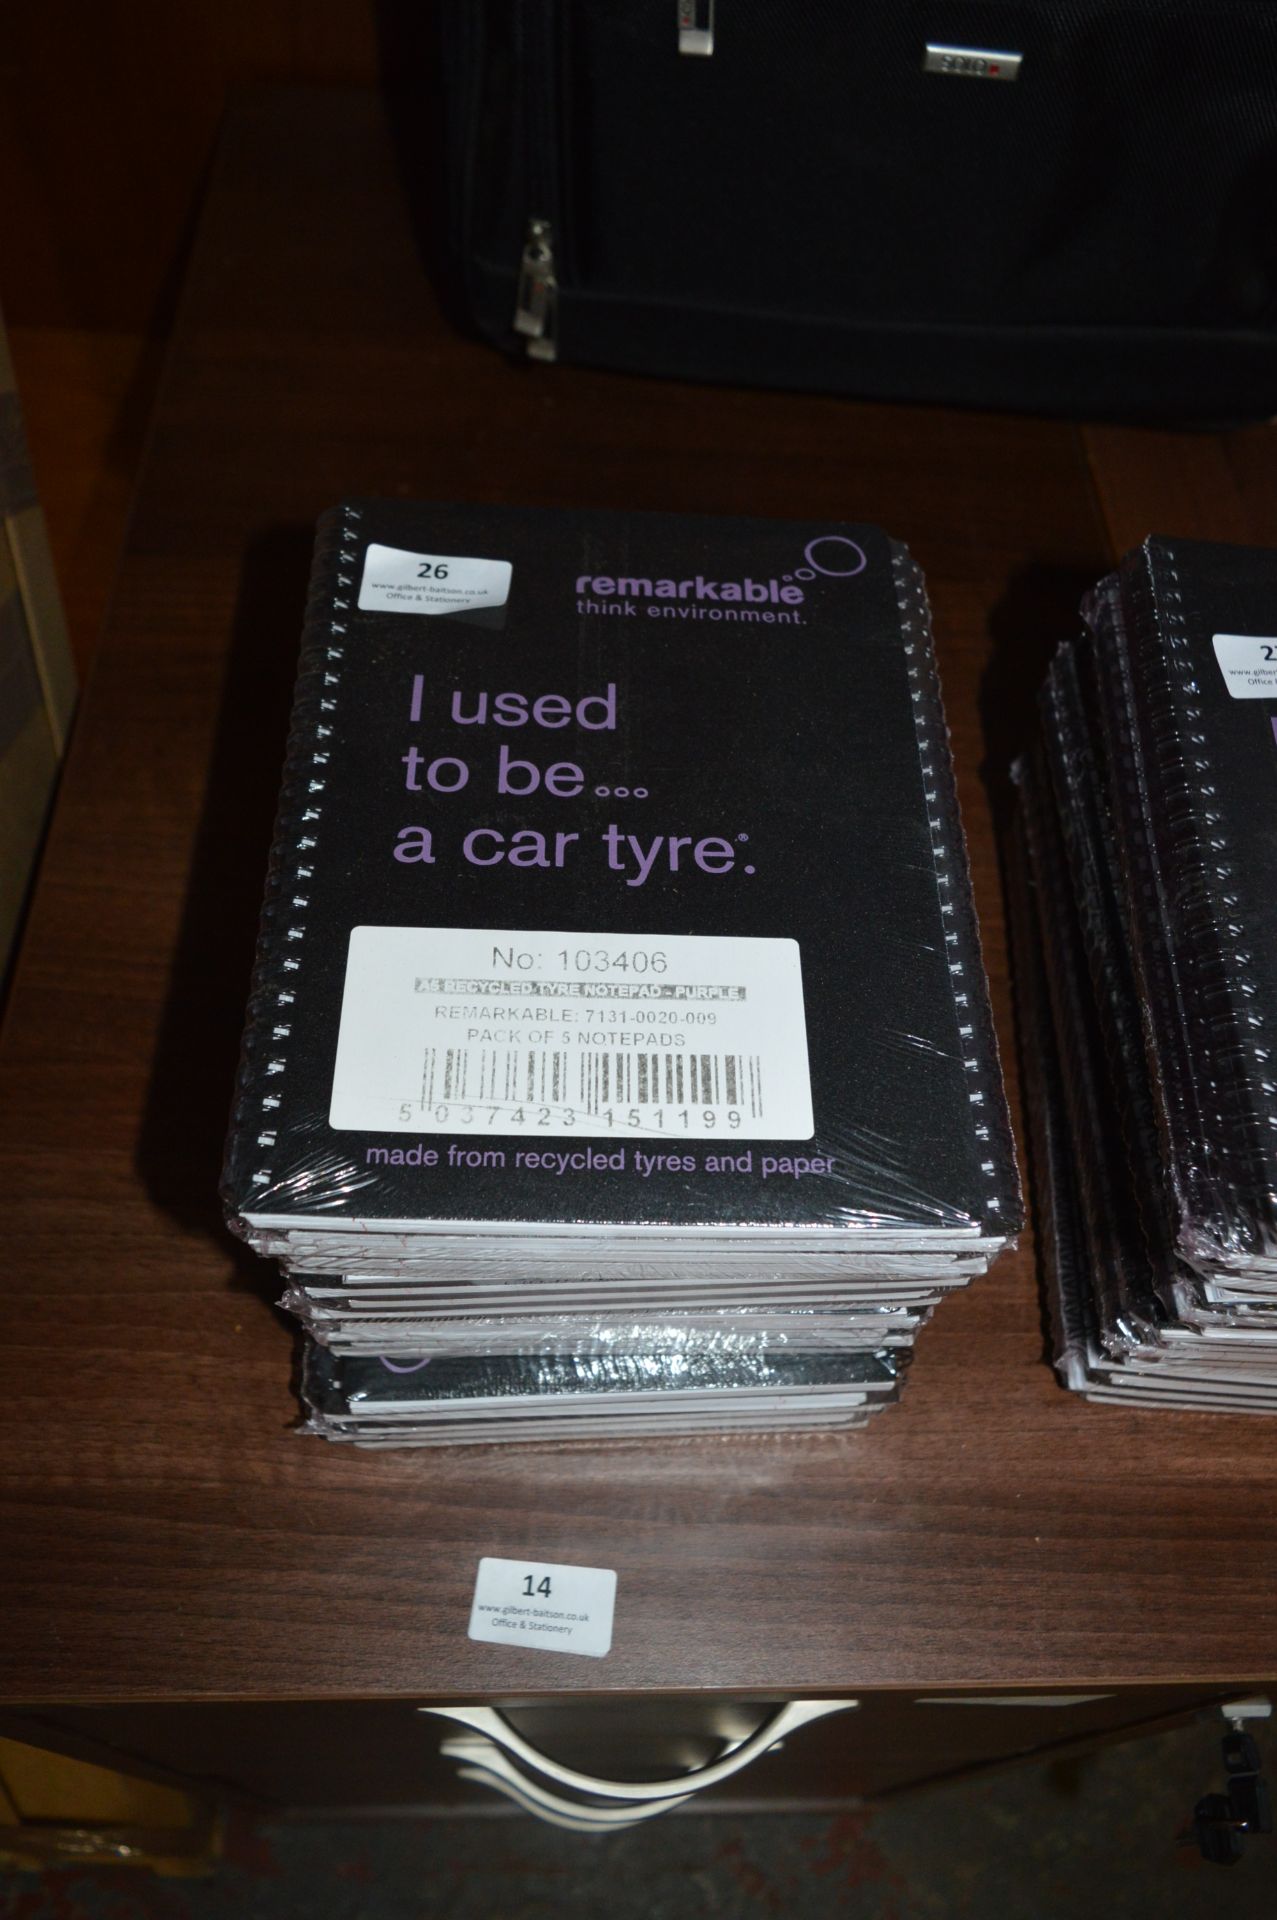 *Twenty A5 Notebooks with Recycled Car Tyre Covers